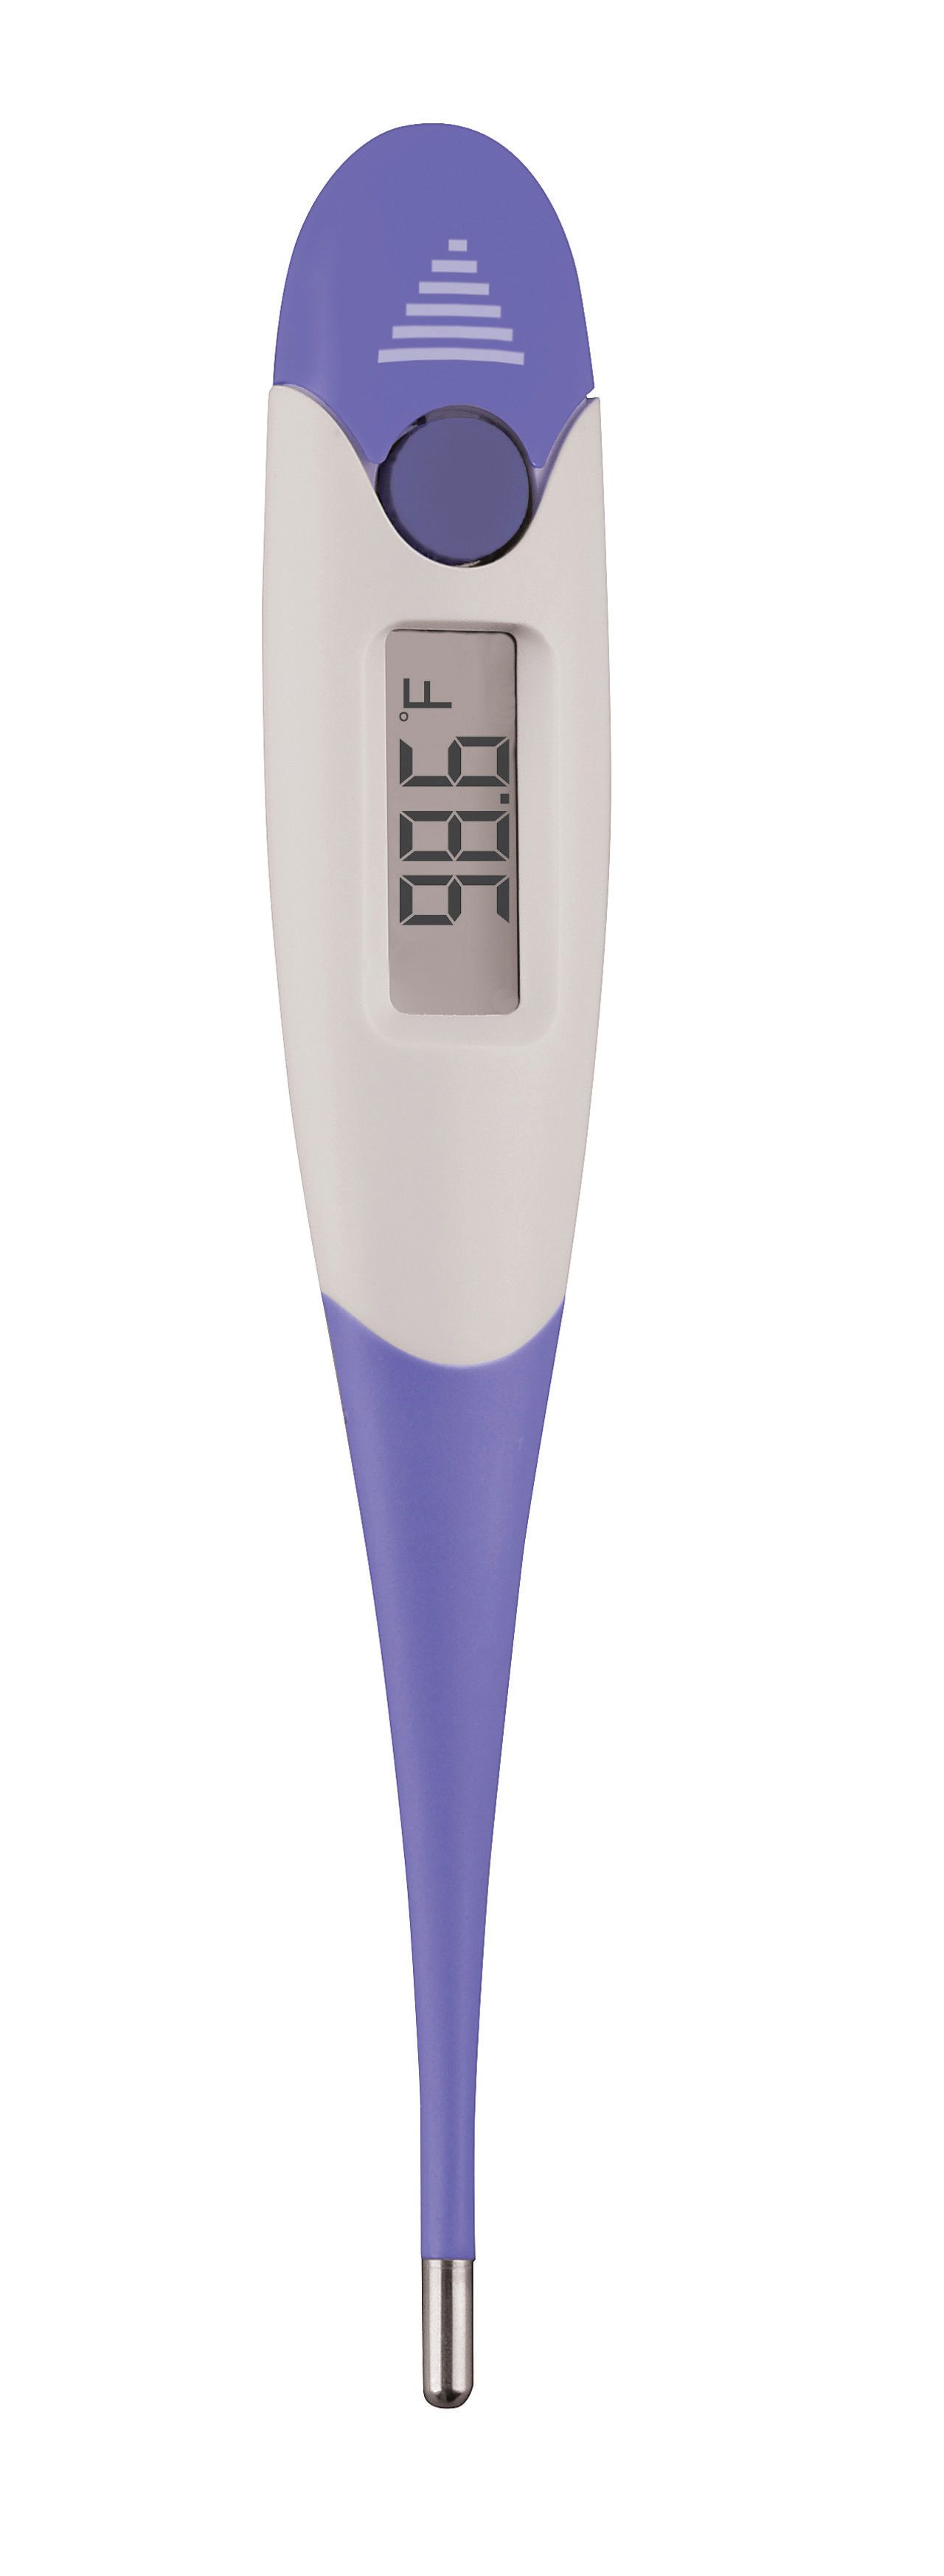 Veridian 9-Second Readout Digital Thermometer